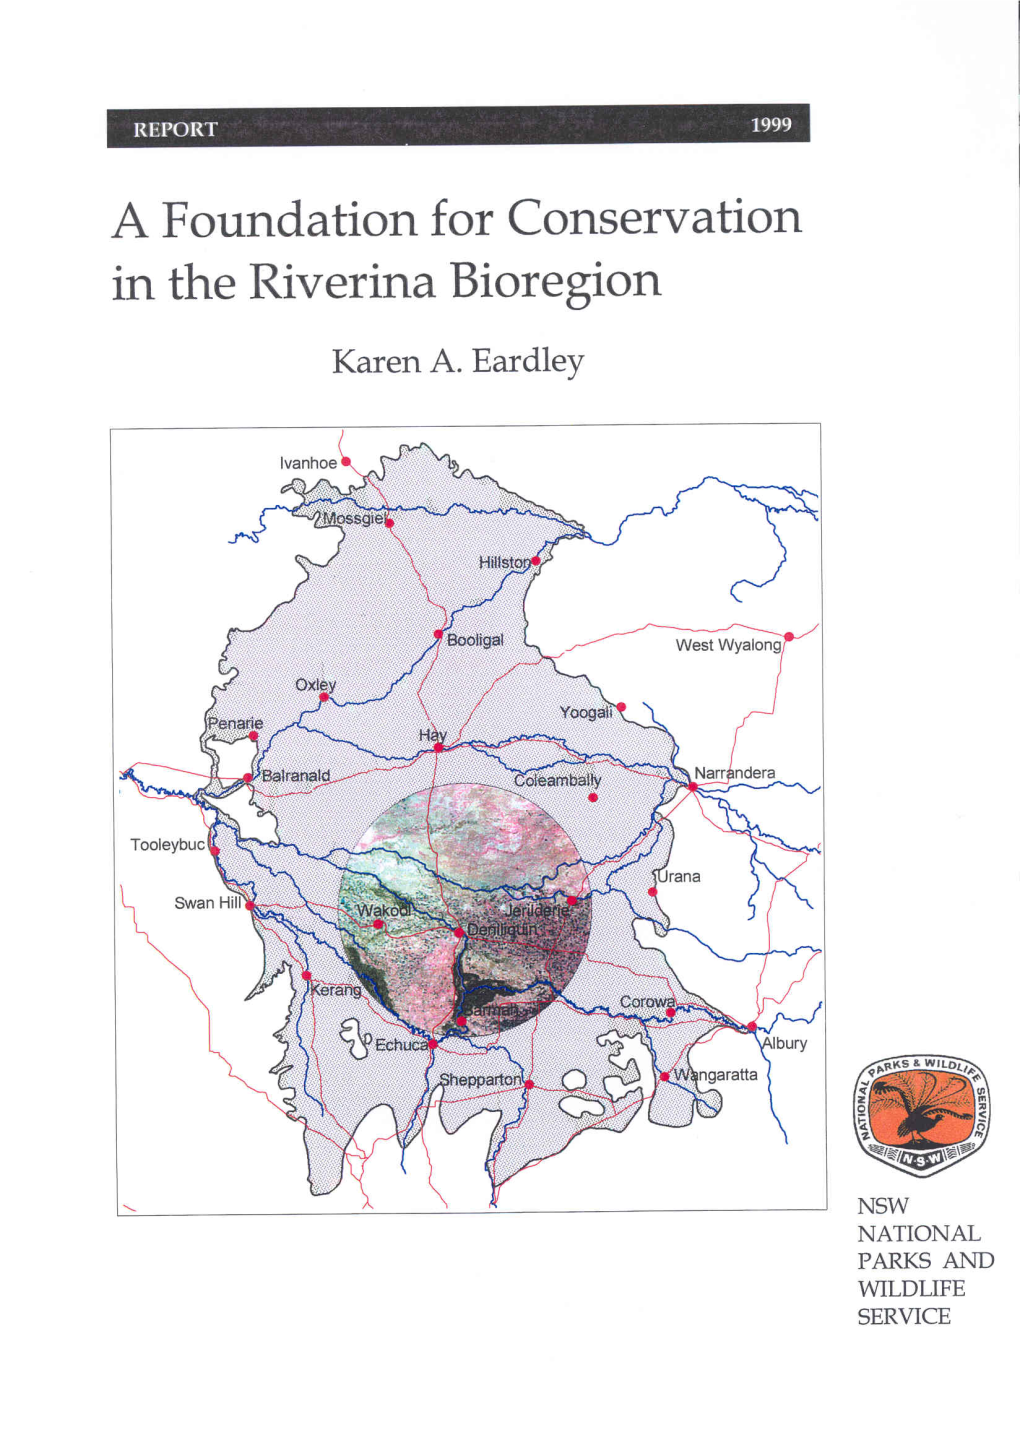 Bioregional Conservation Strategy for the Riverina